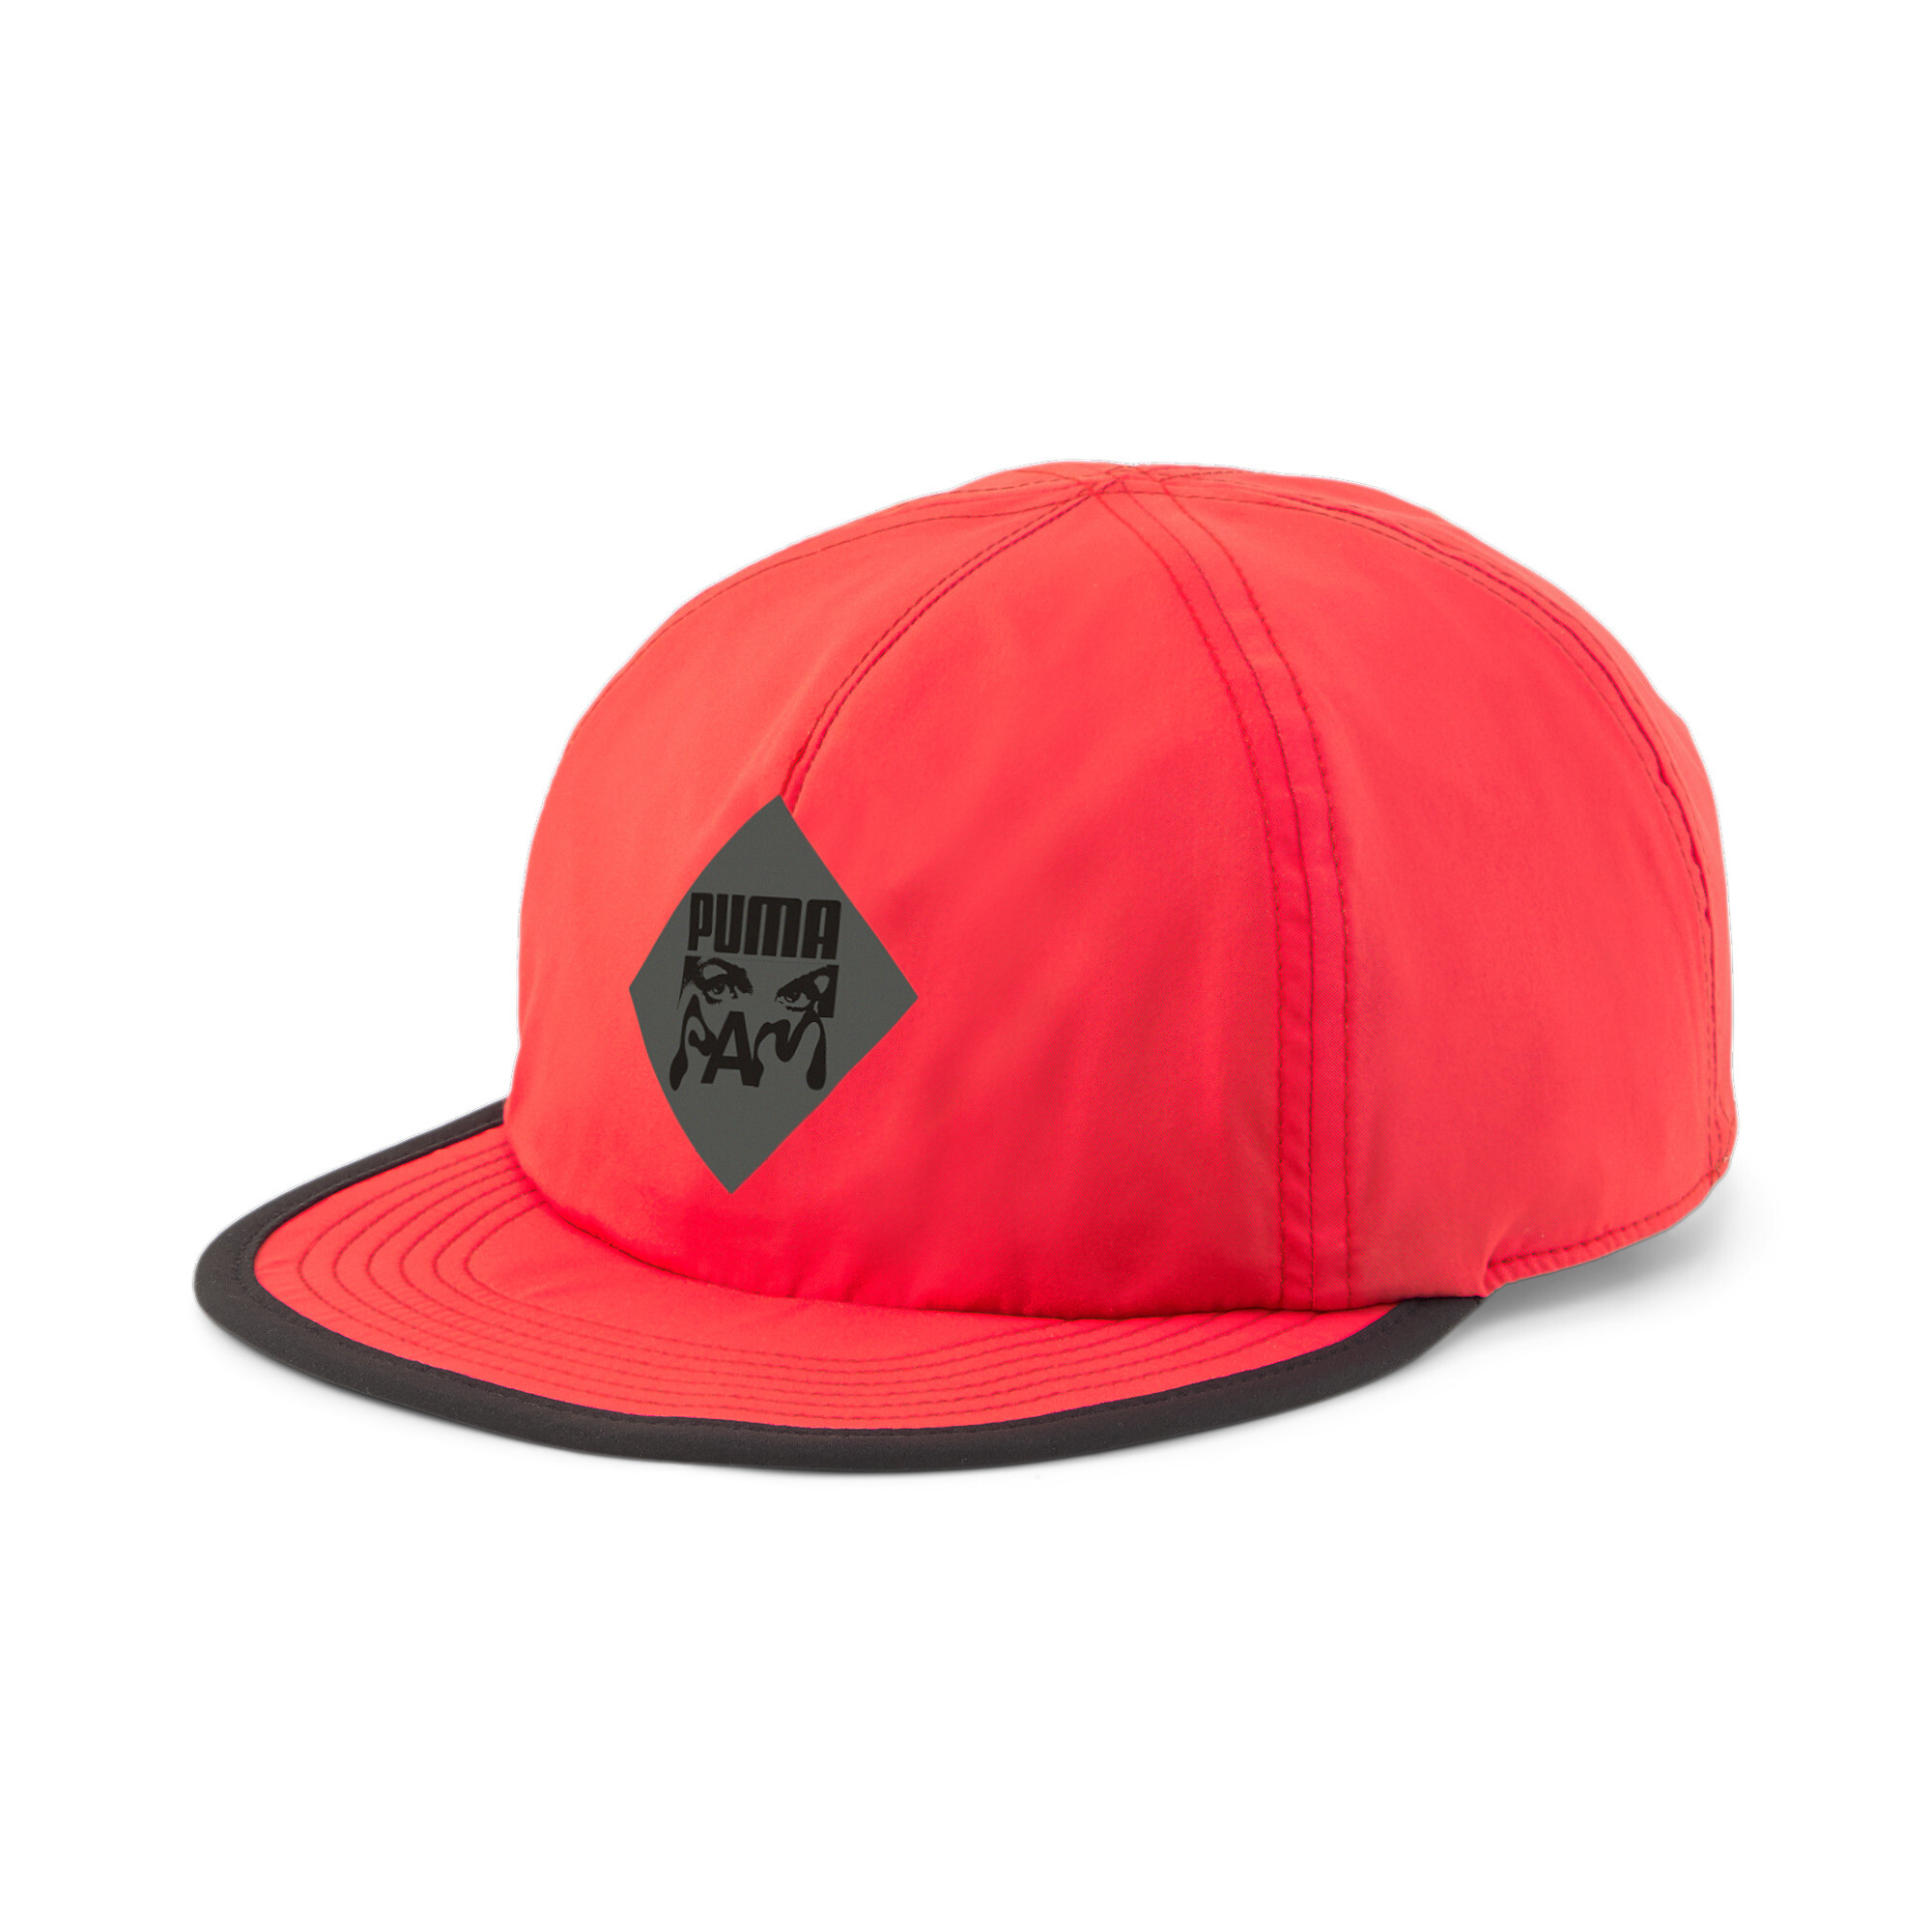 Puma X PERKS AND MINI Reversible Cap, Red, Size Adult, Accessories